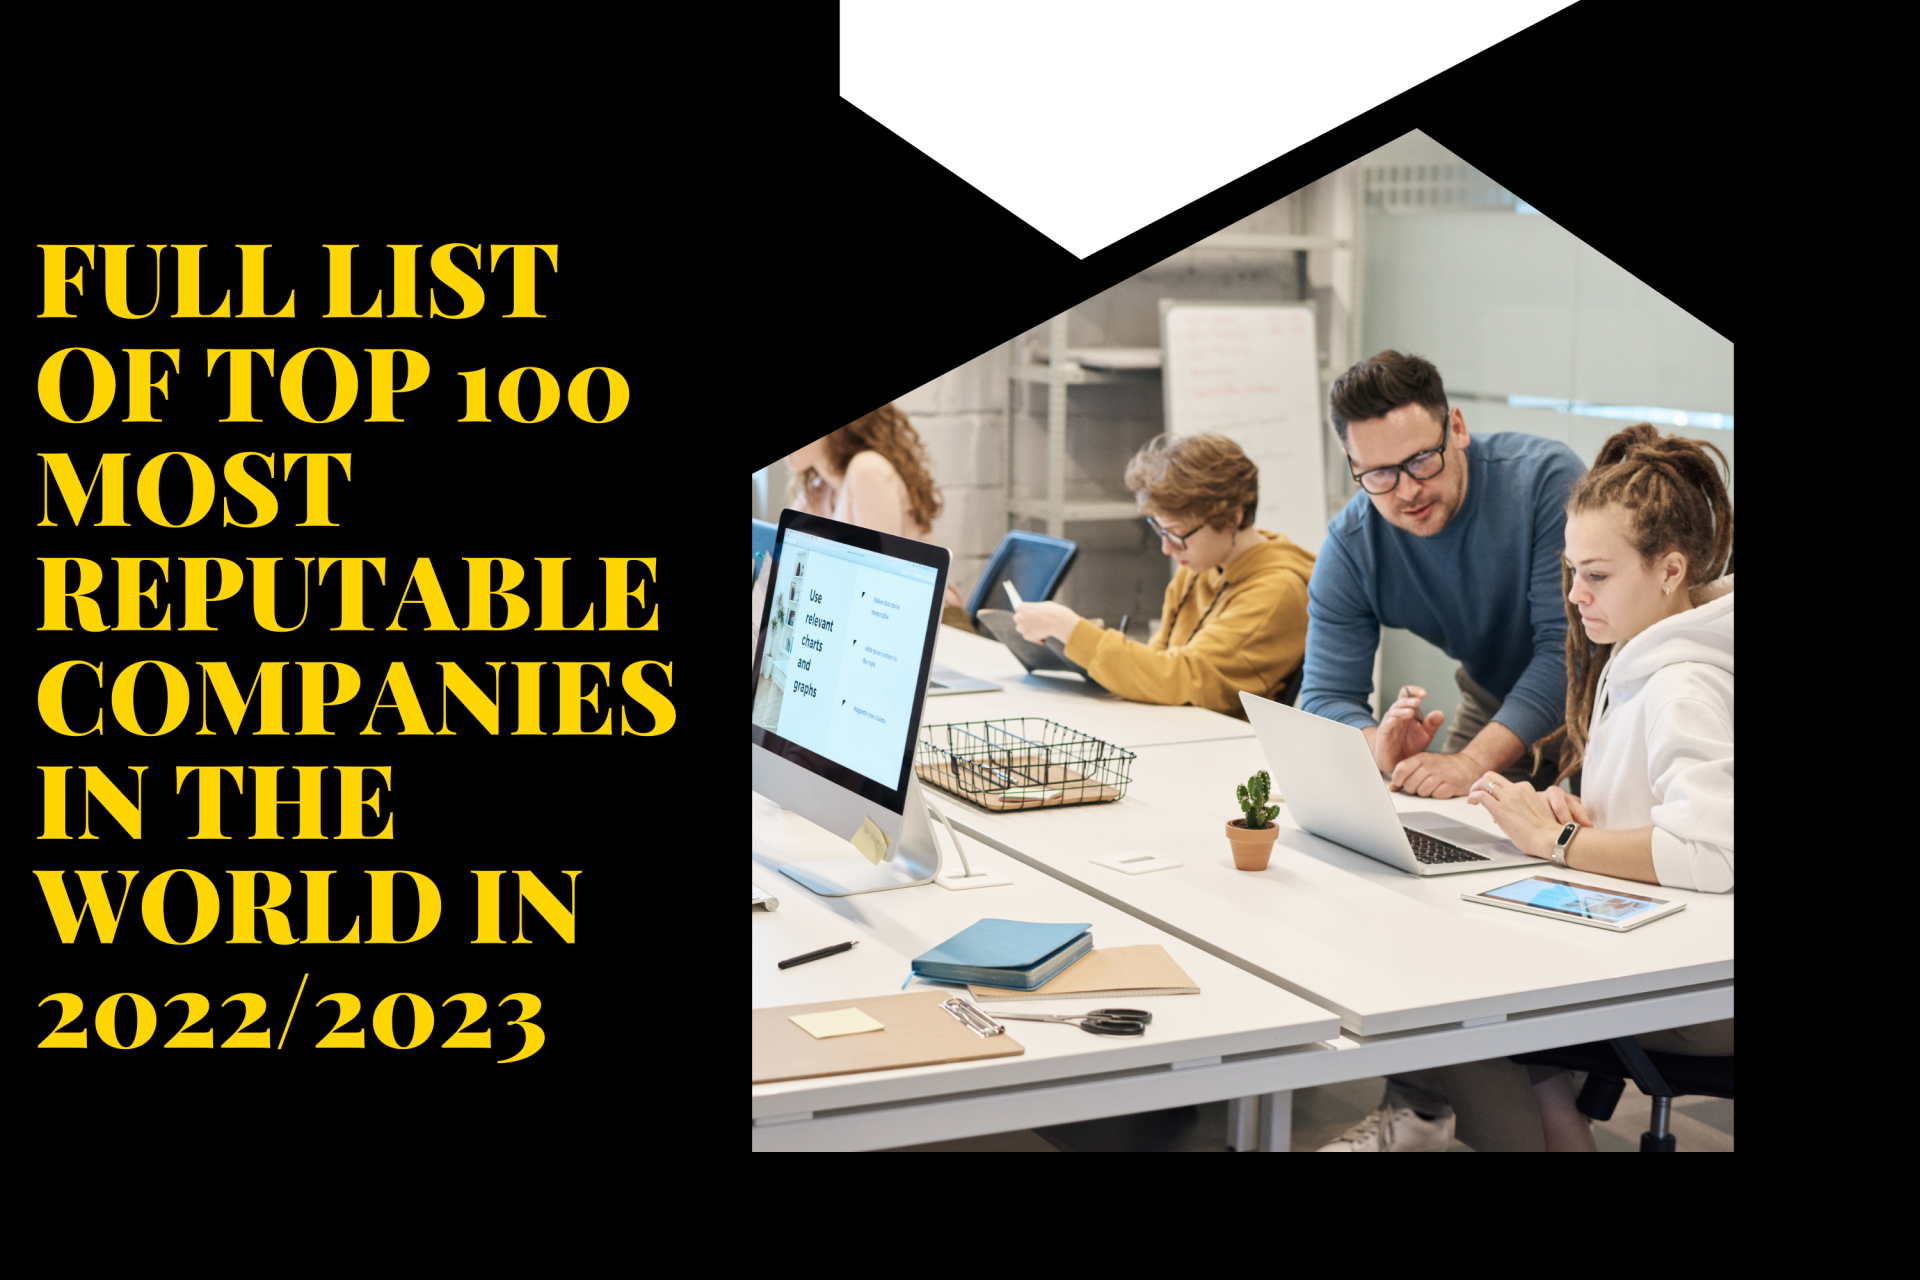 Full List of Top 100 Most Reputable Companies In The World in 2022/2023